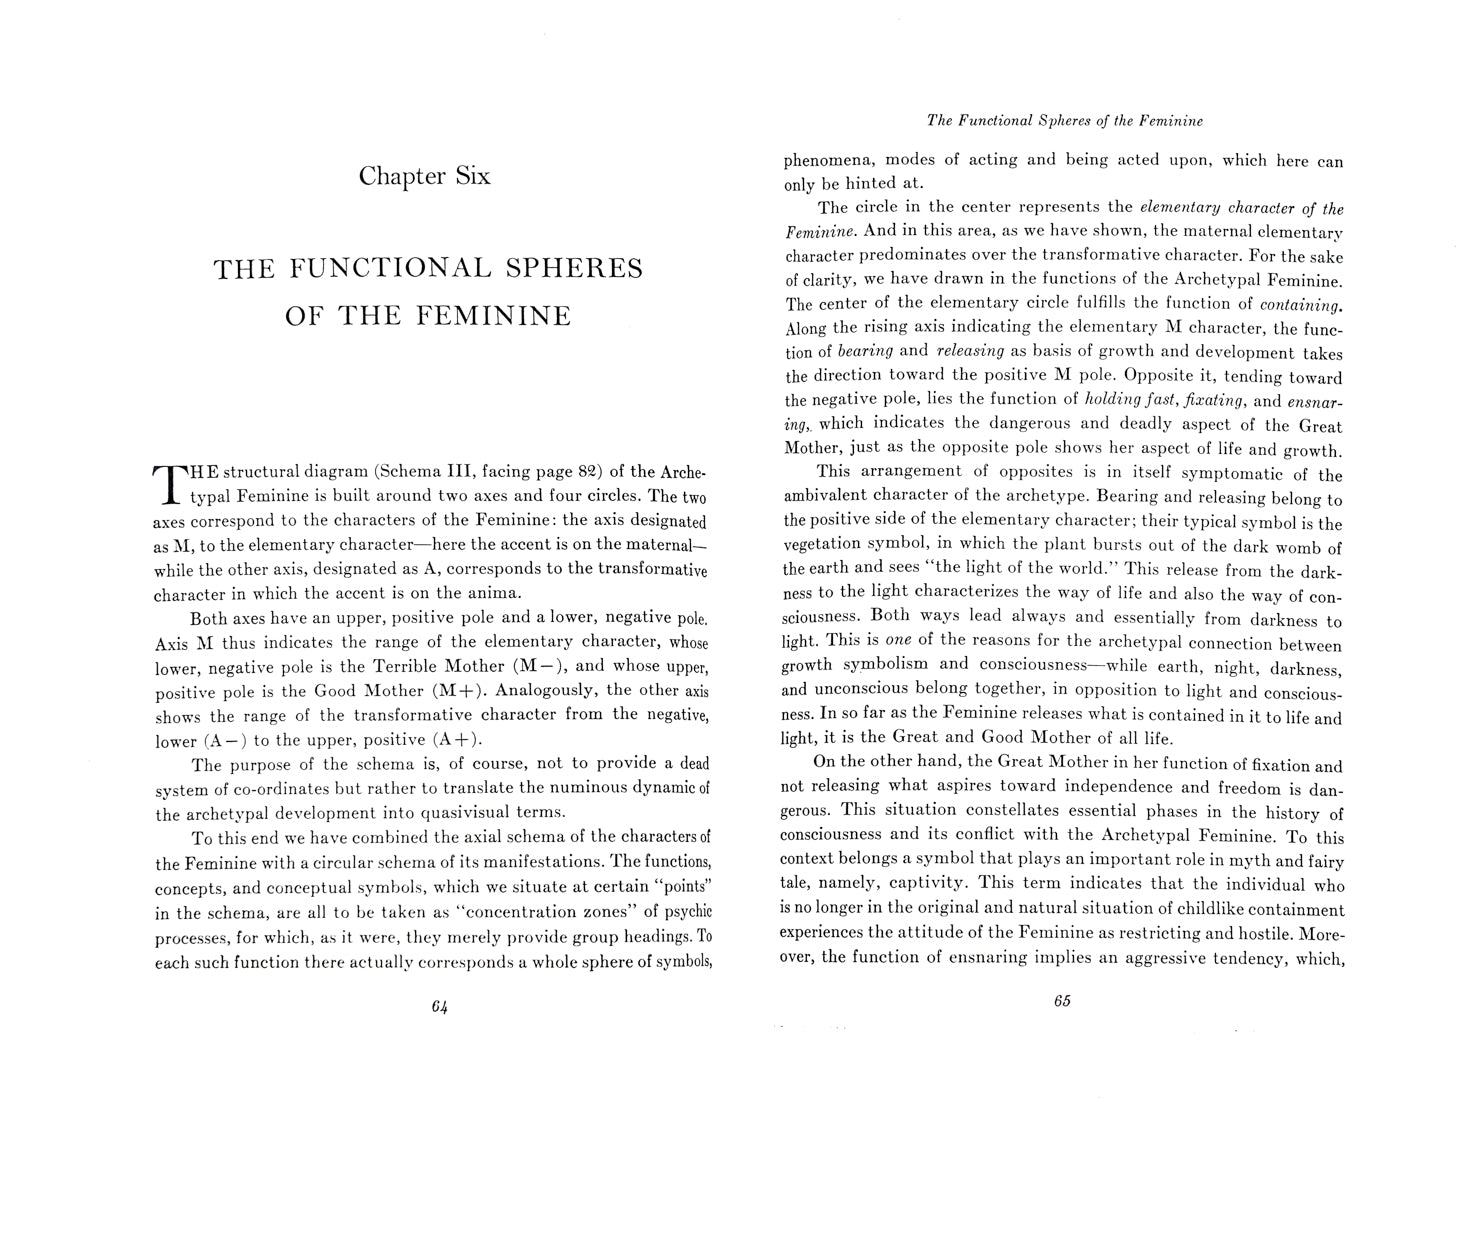 Spread of the pages 64 and 65 depicting black on white flow text in serif type. The left page opens: Çhapter Six: The Functional Spheres Of The Feminine'. 